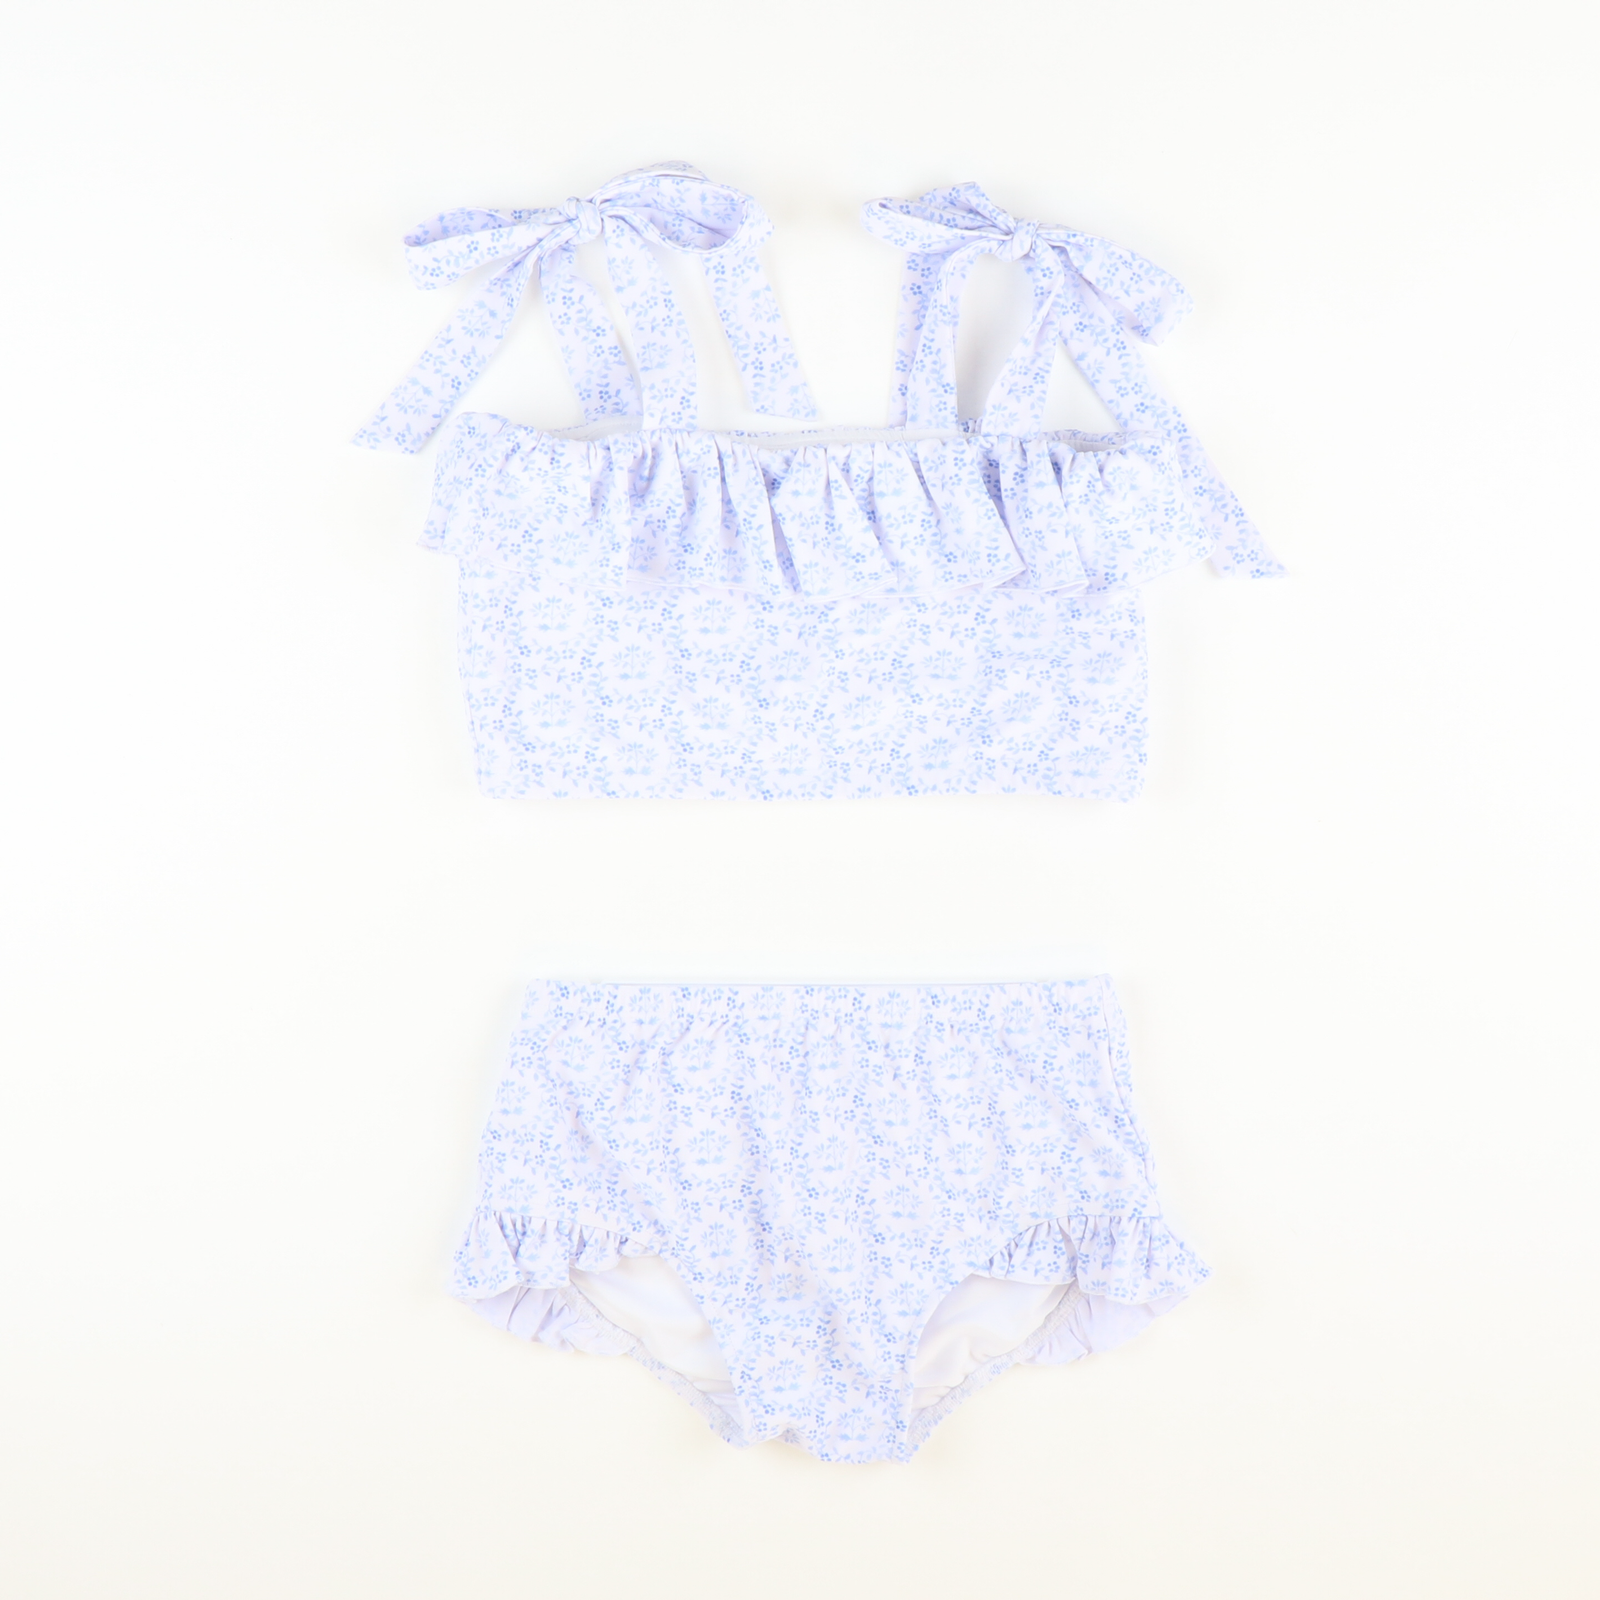 Watercolor Blue Swim Trunks - Southern Smocked Co.